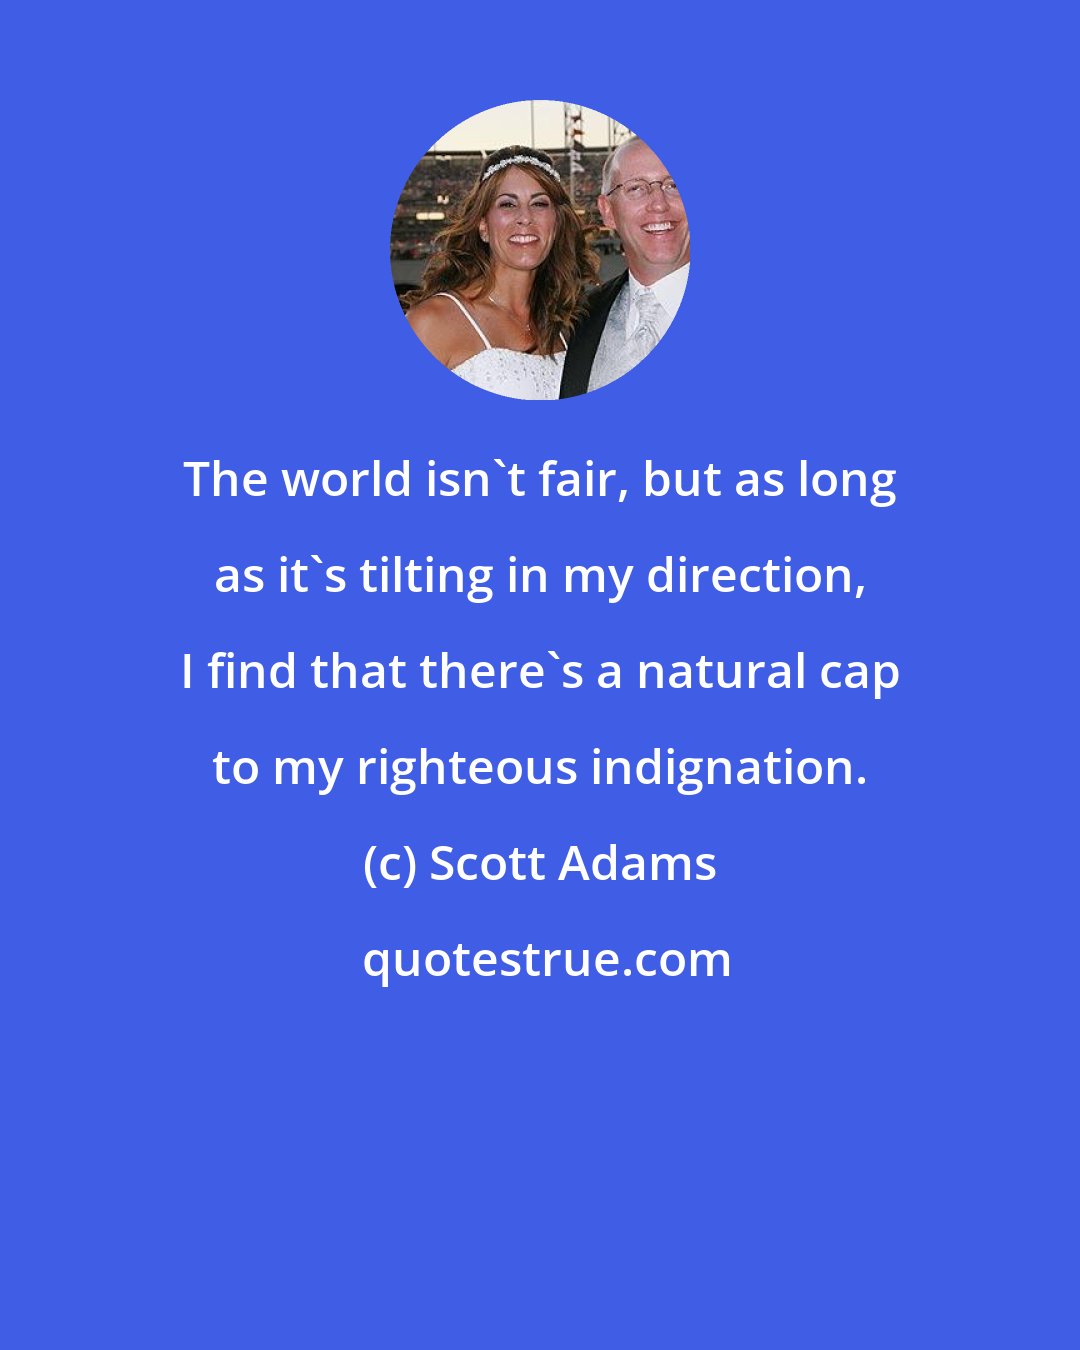 Scott Adams: The world isn't fair, but as long as it's tilting in my direction, I find that there's a natural cap to my righteous indignation.